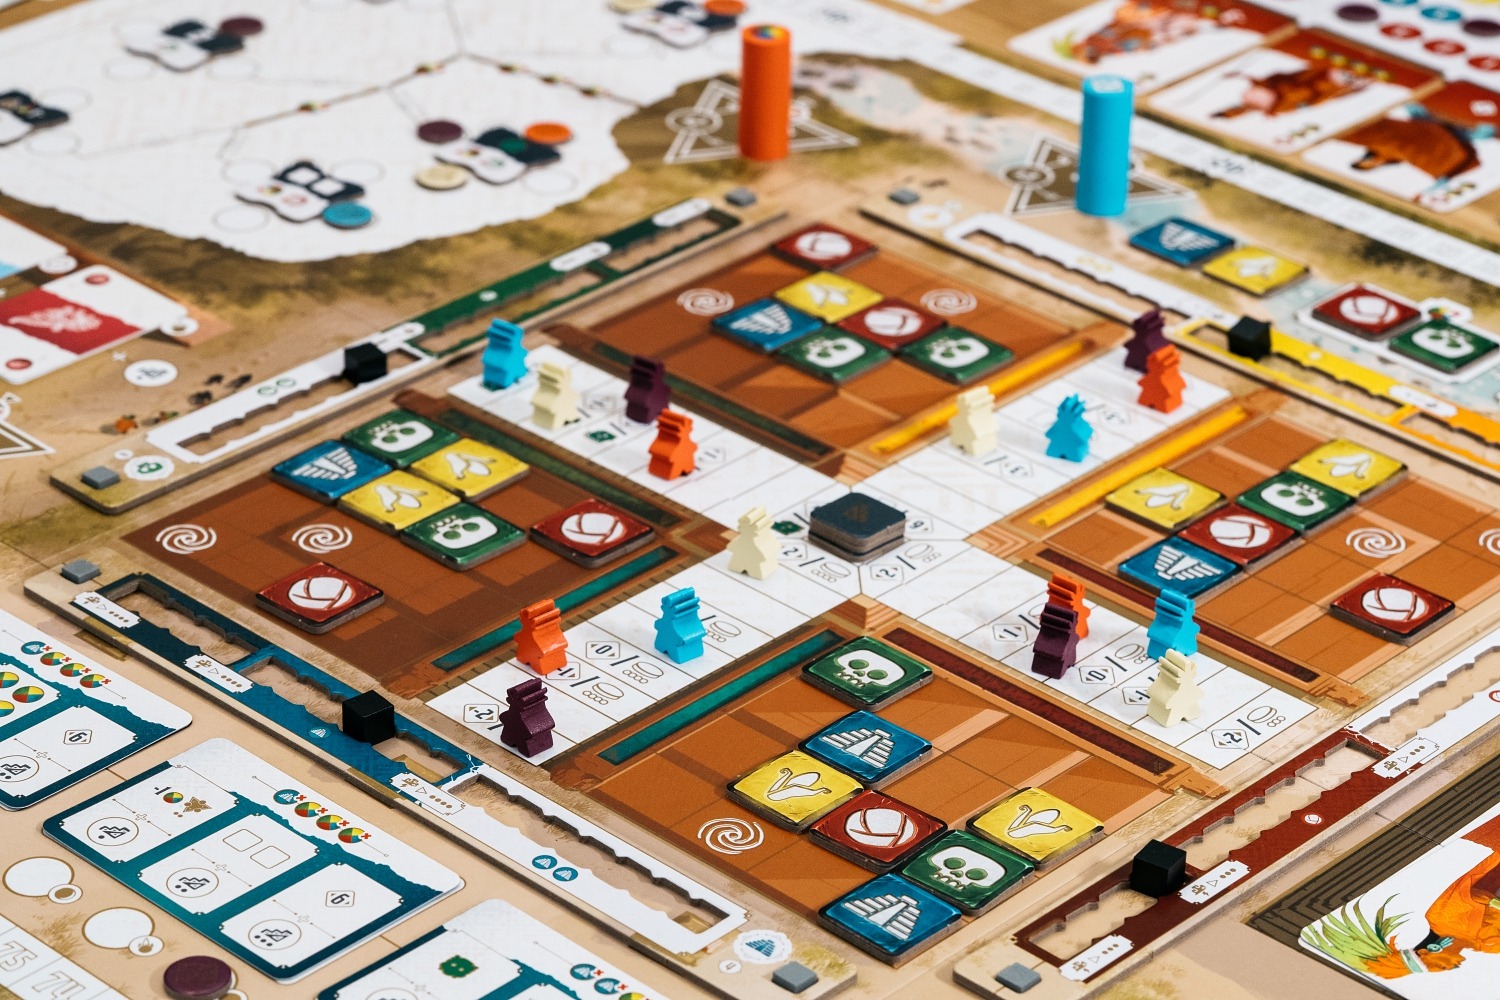 Copan: Dying City holy grail games boardgame